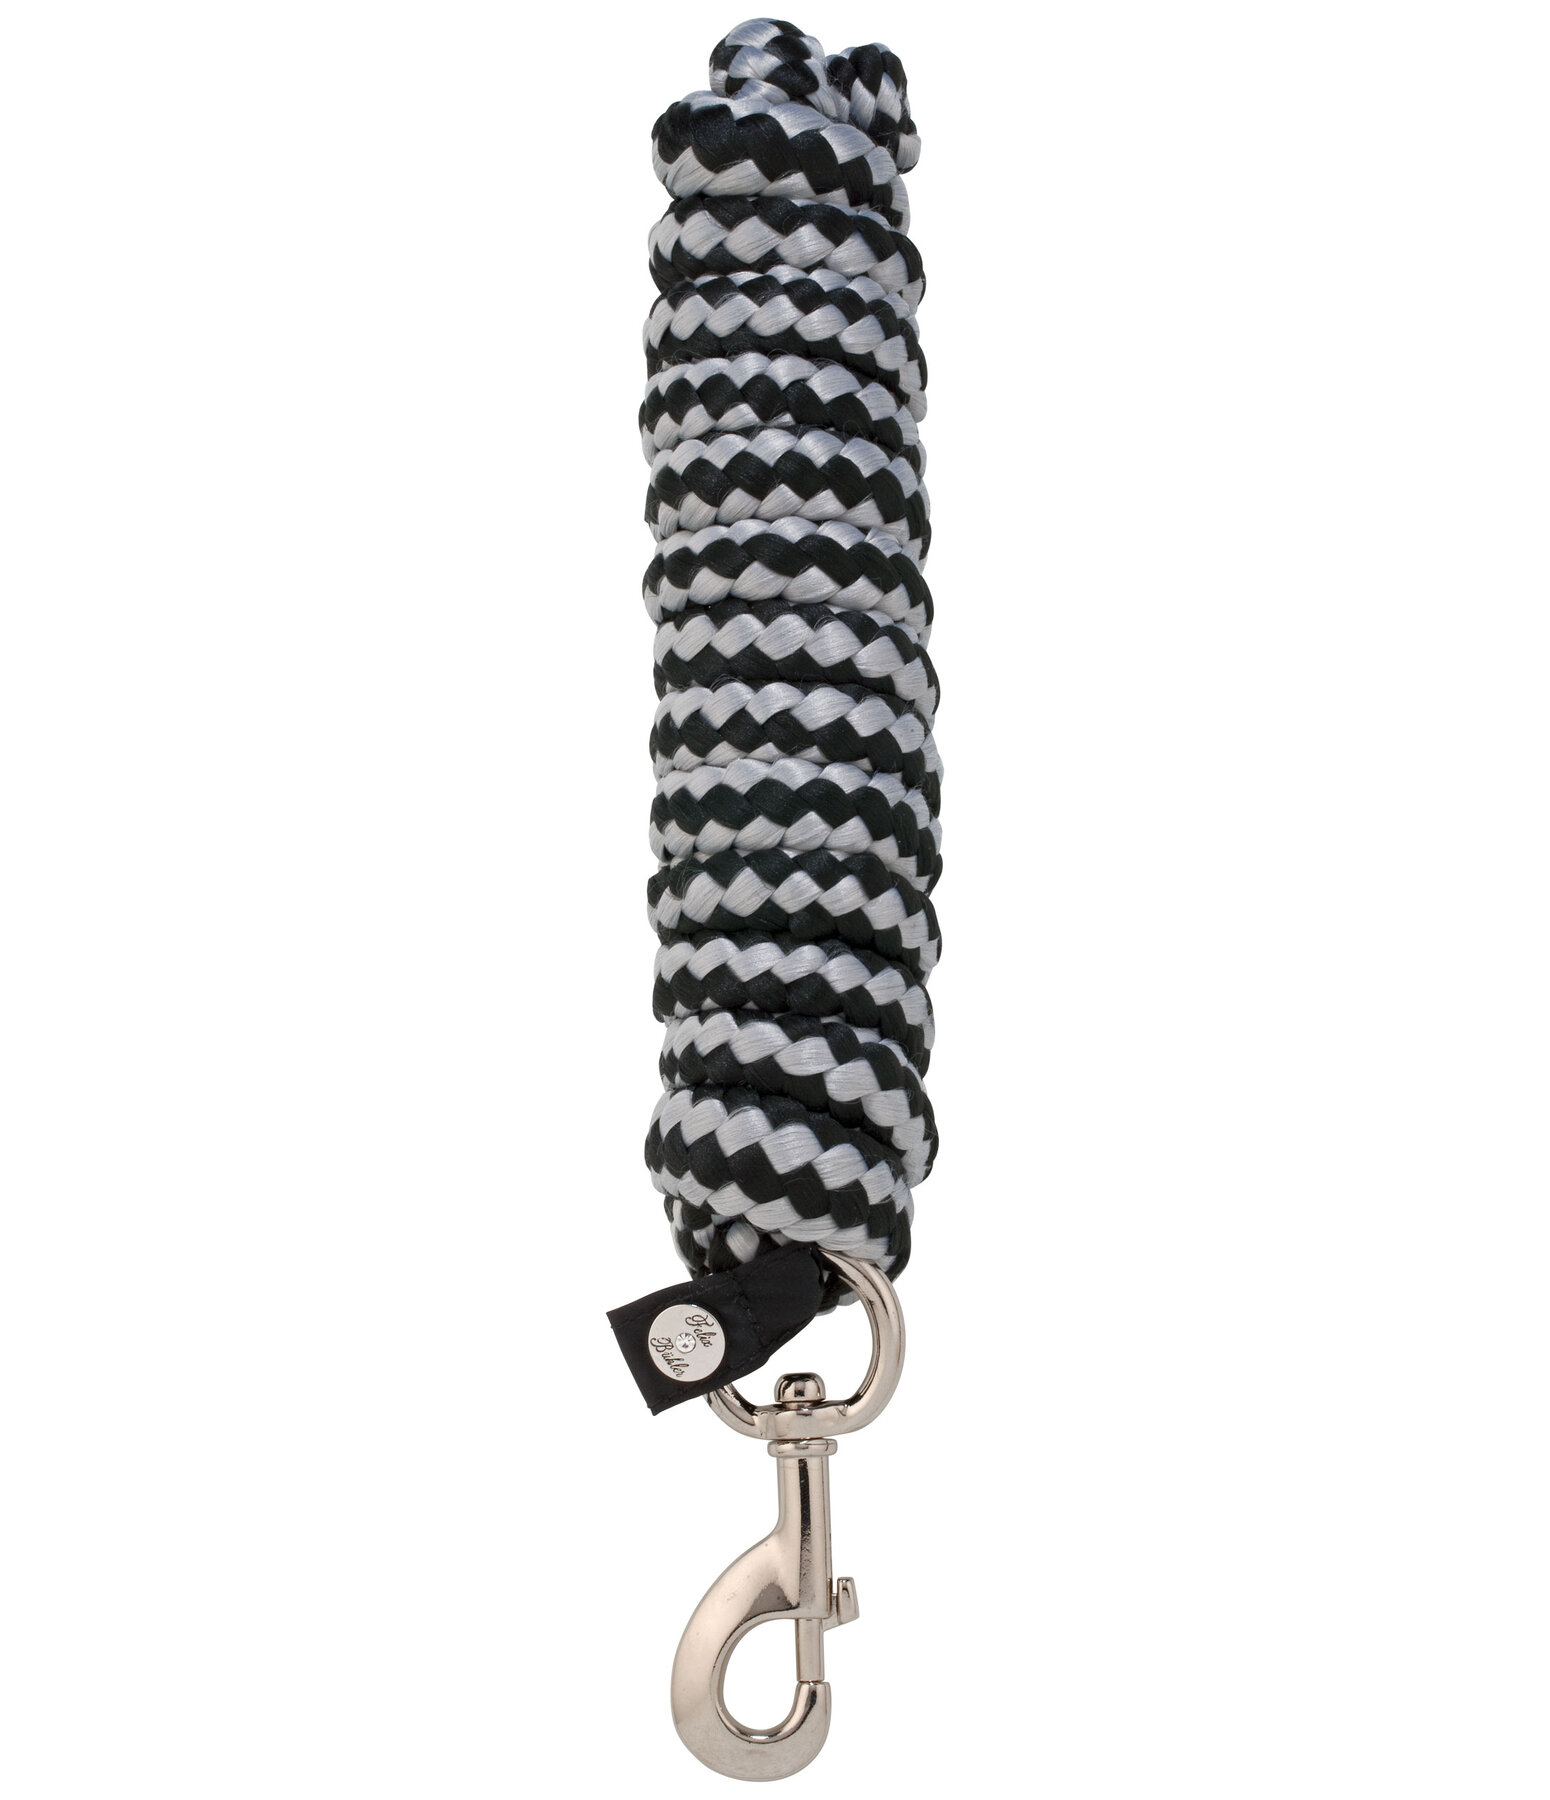 Ruffles & Diamonds Lead rope with Snap Hook